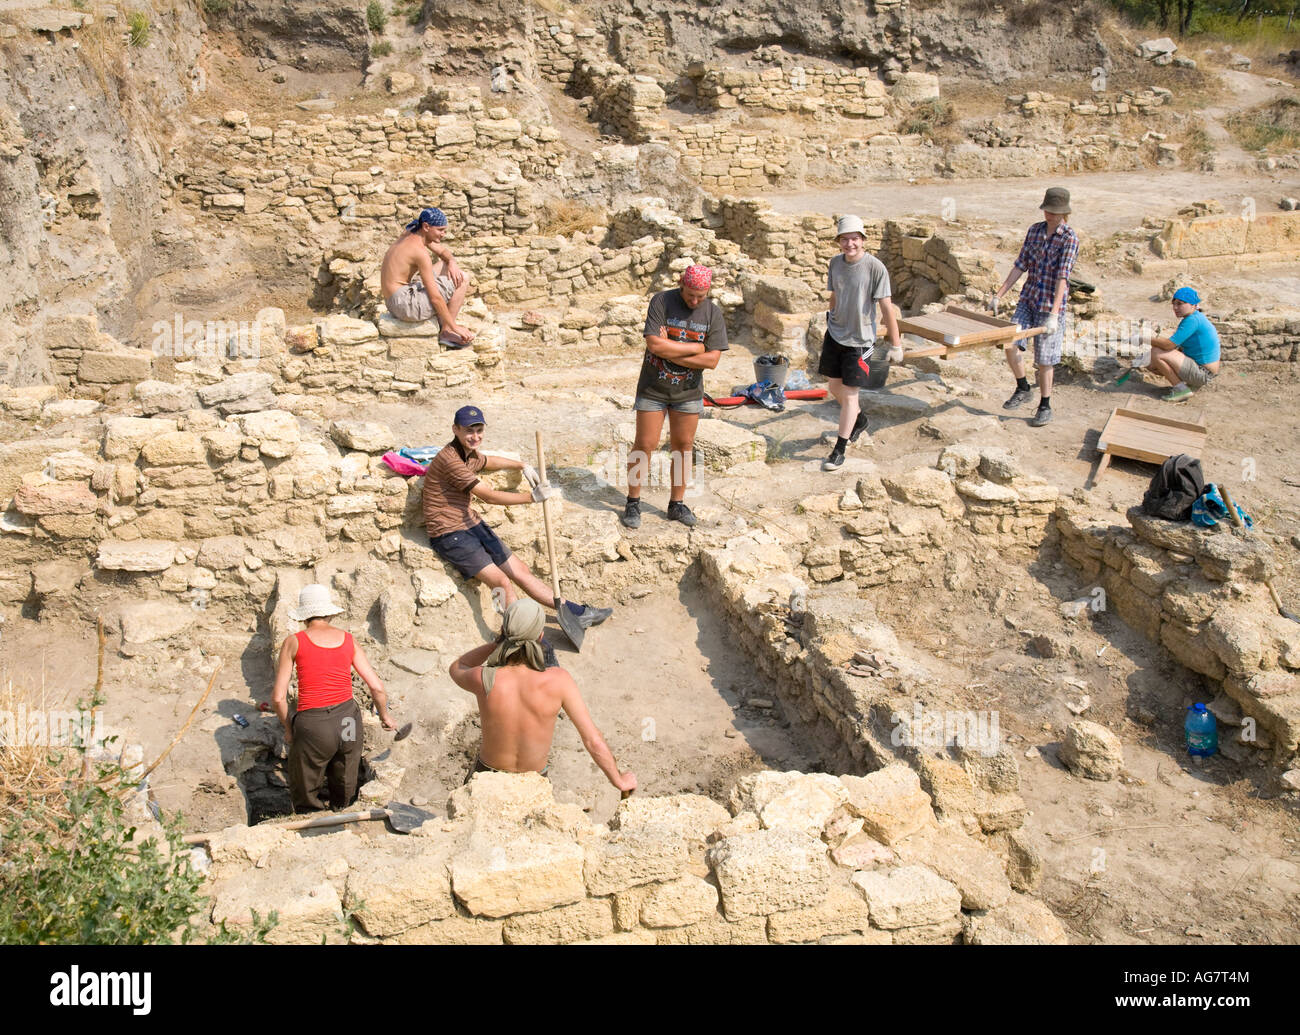 Archaeology students working at an excavation site of the ancient greek settlement of Tyras in nowadays Ukraine Stock Photo